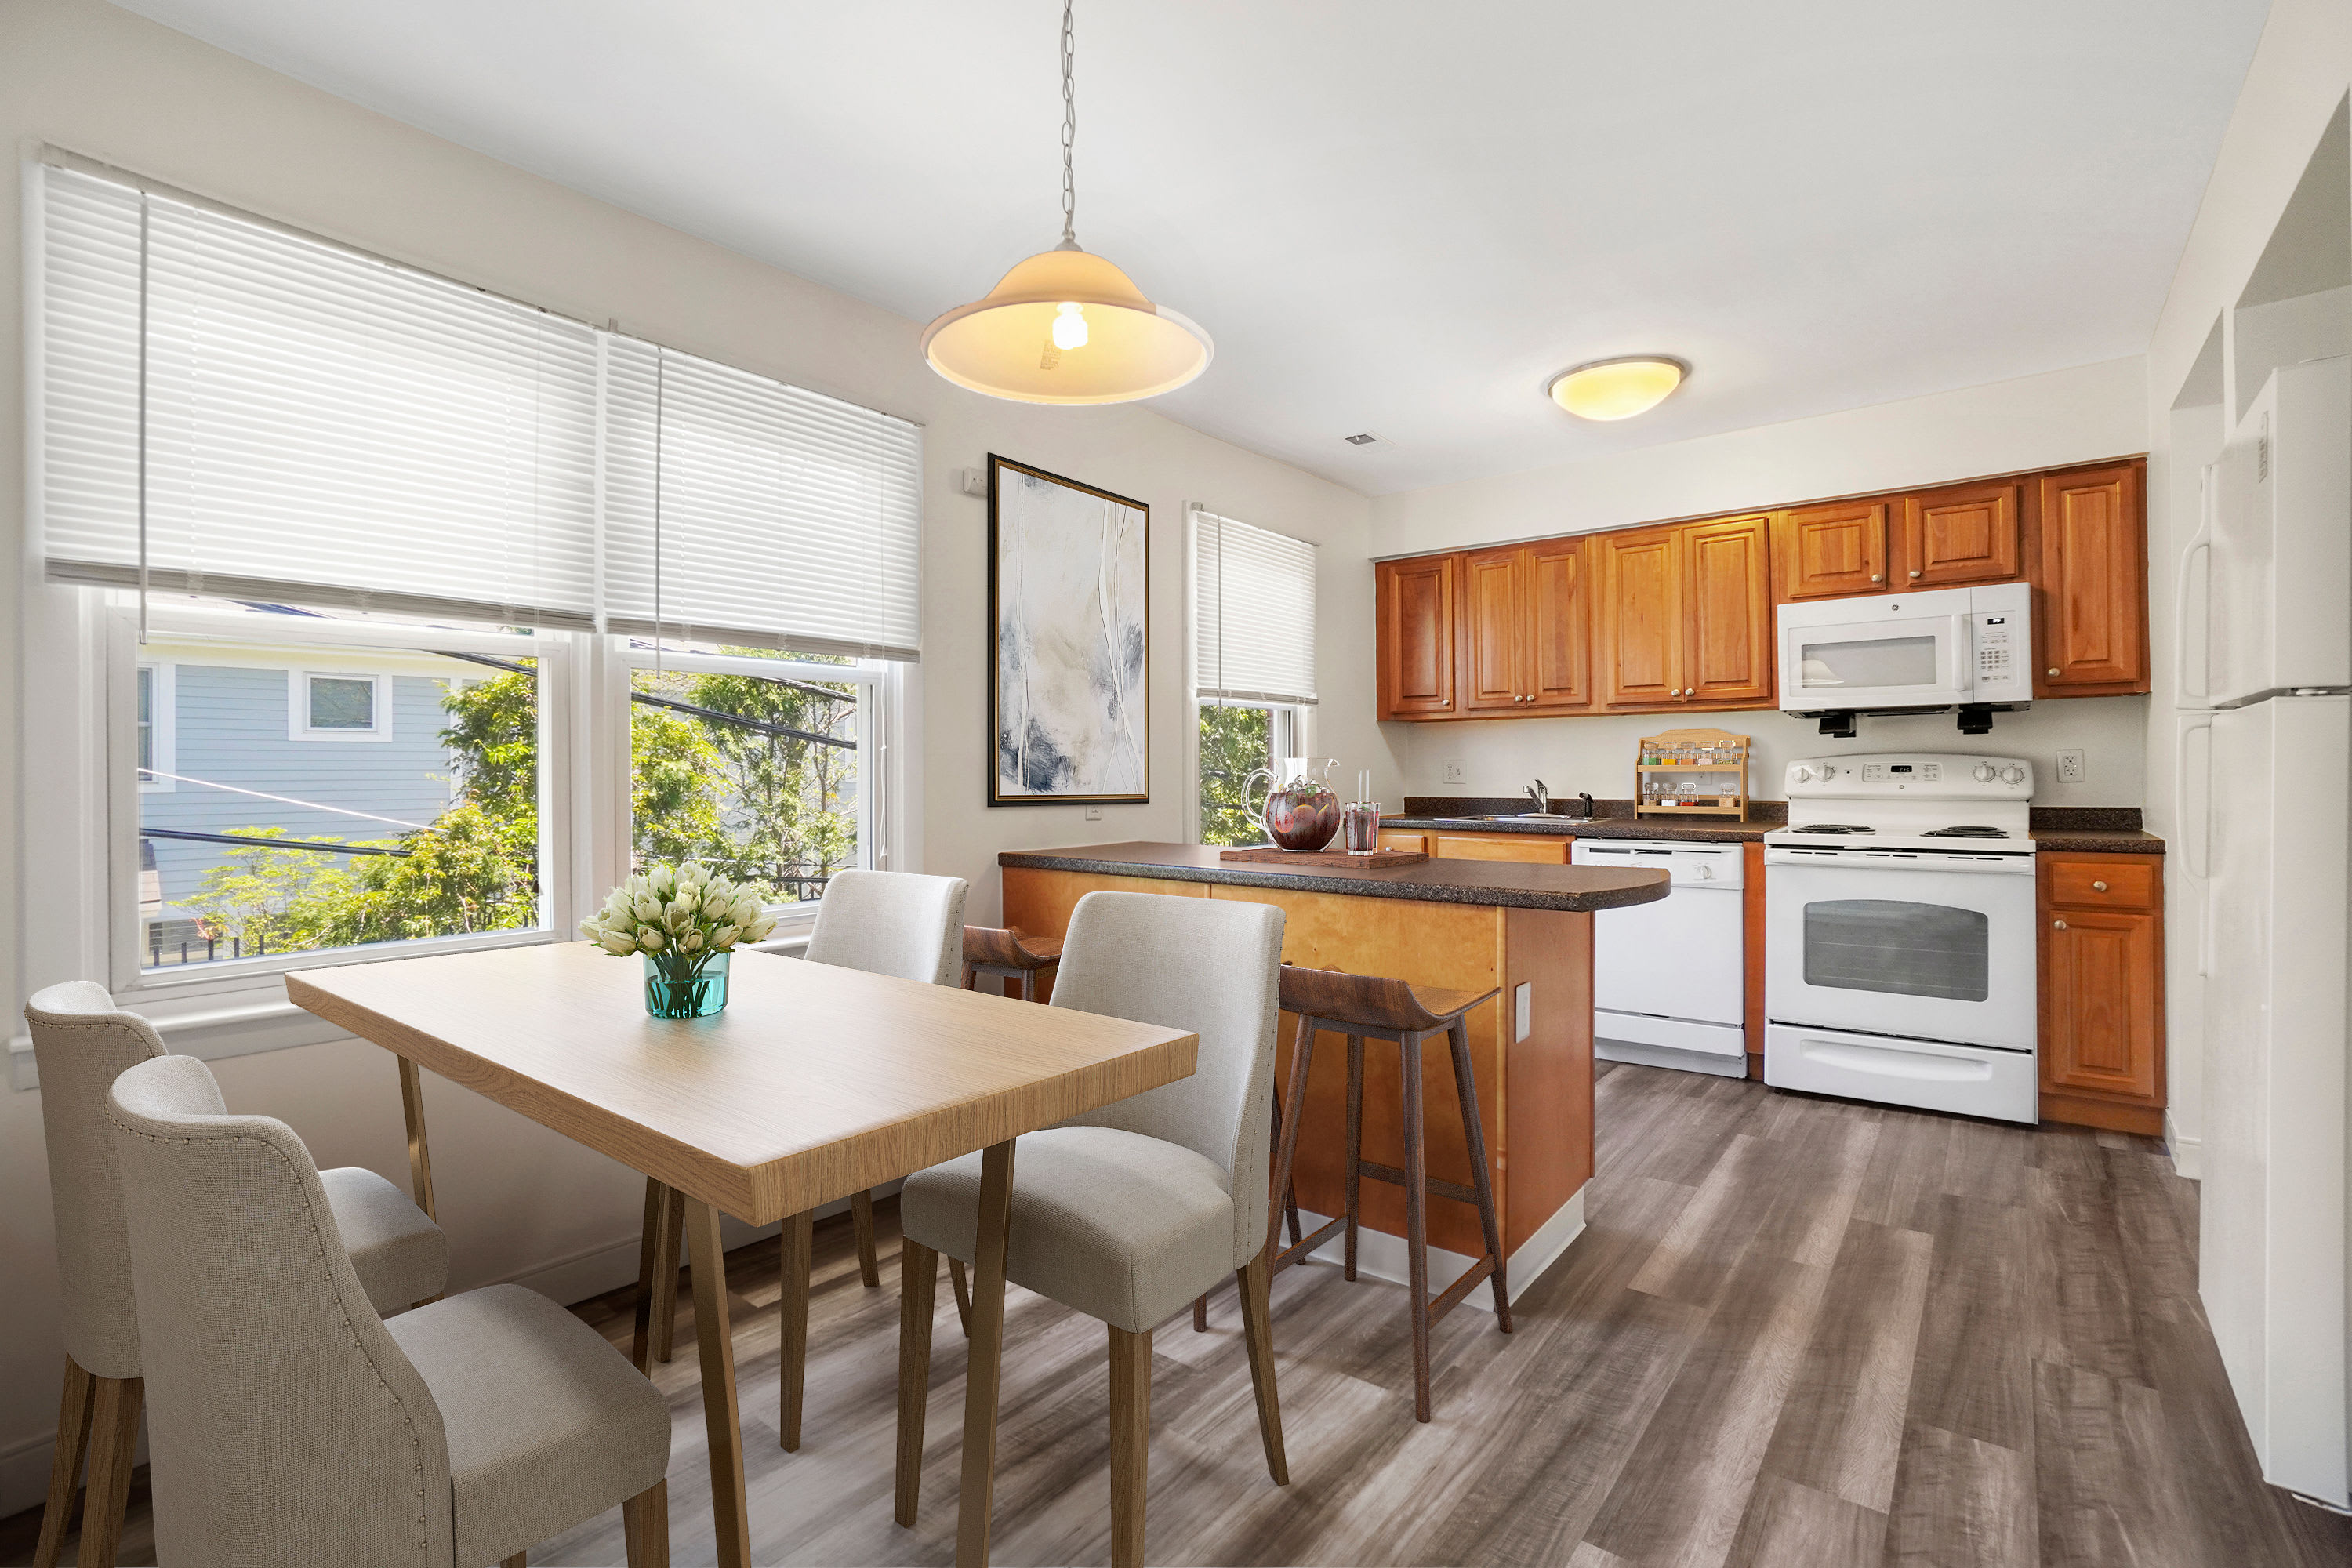 Stony Brook Commons offers a Beautiful Kitchen in Roslindale, Massachusetts